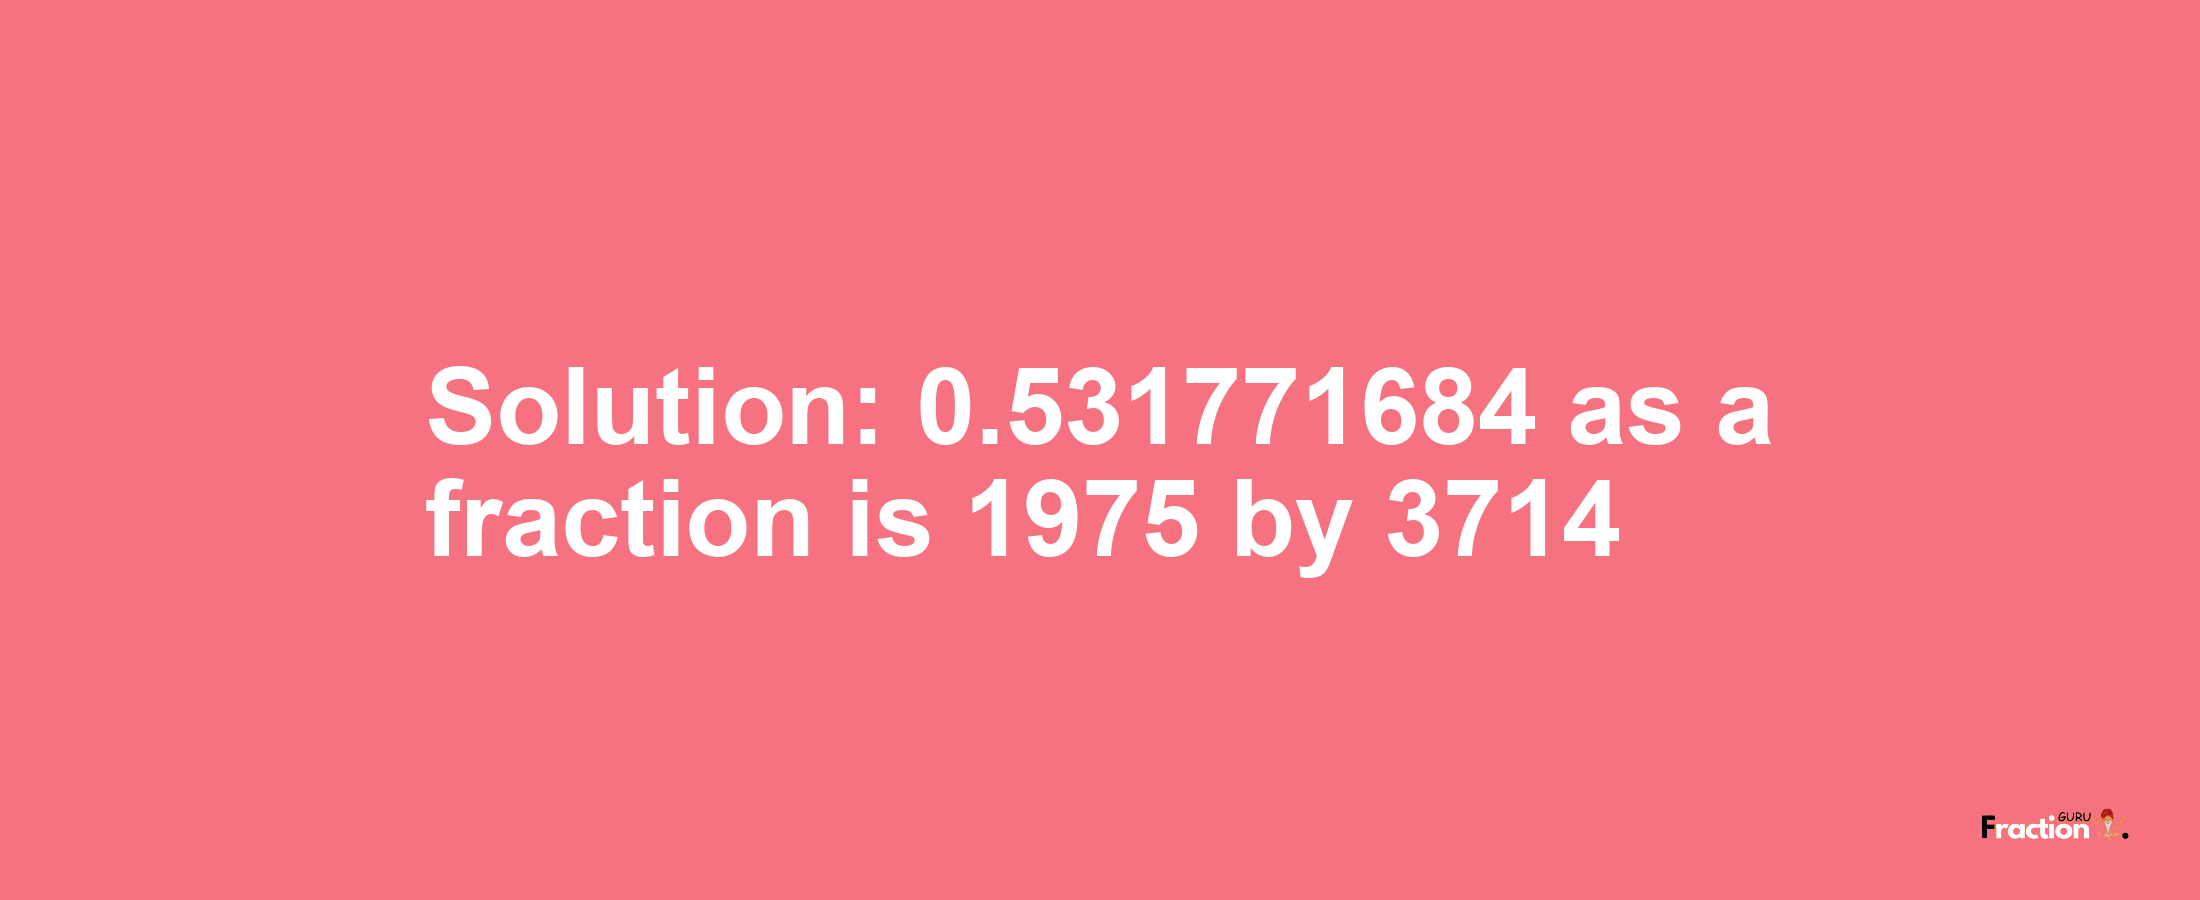 Solution:0.531771684 as a fraction is 1975/3714